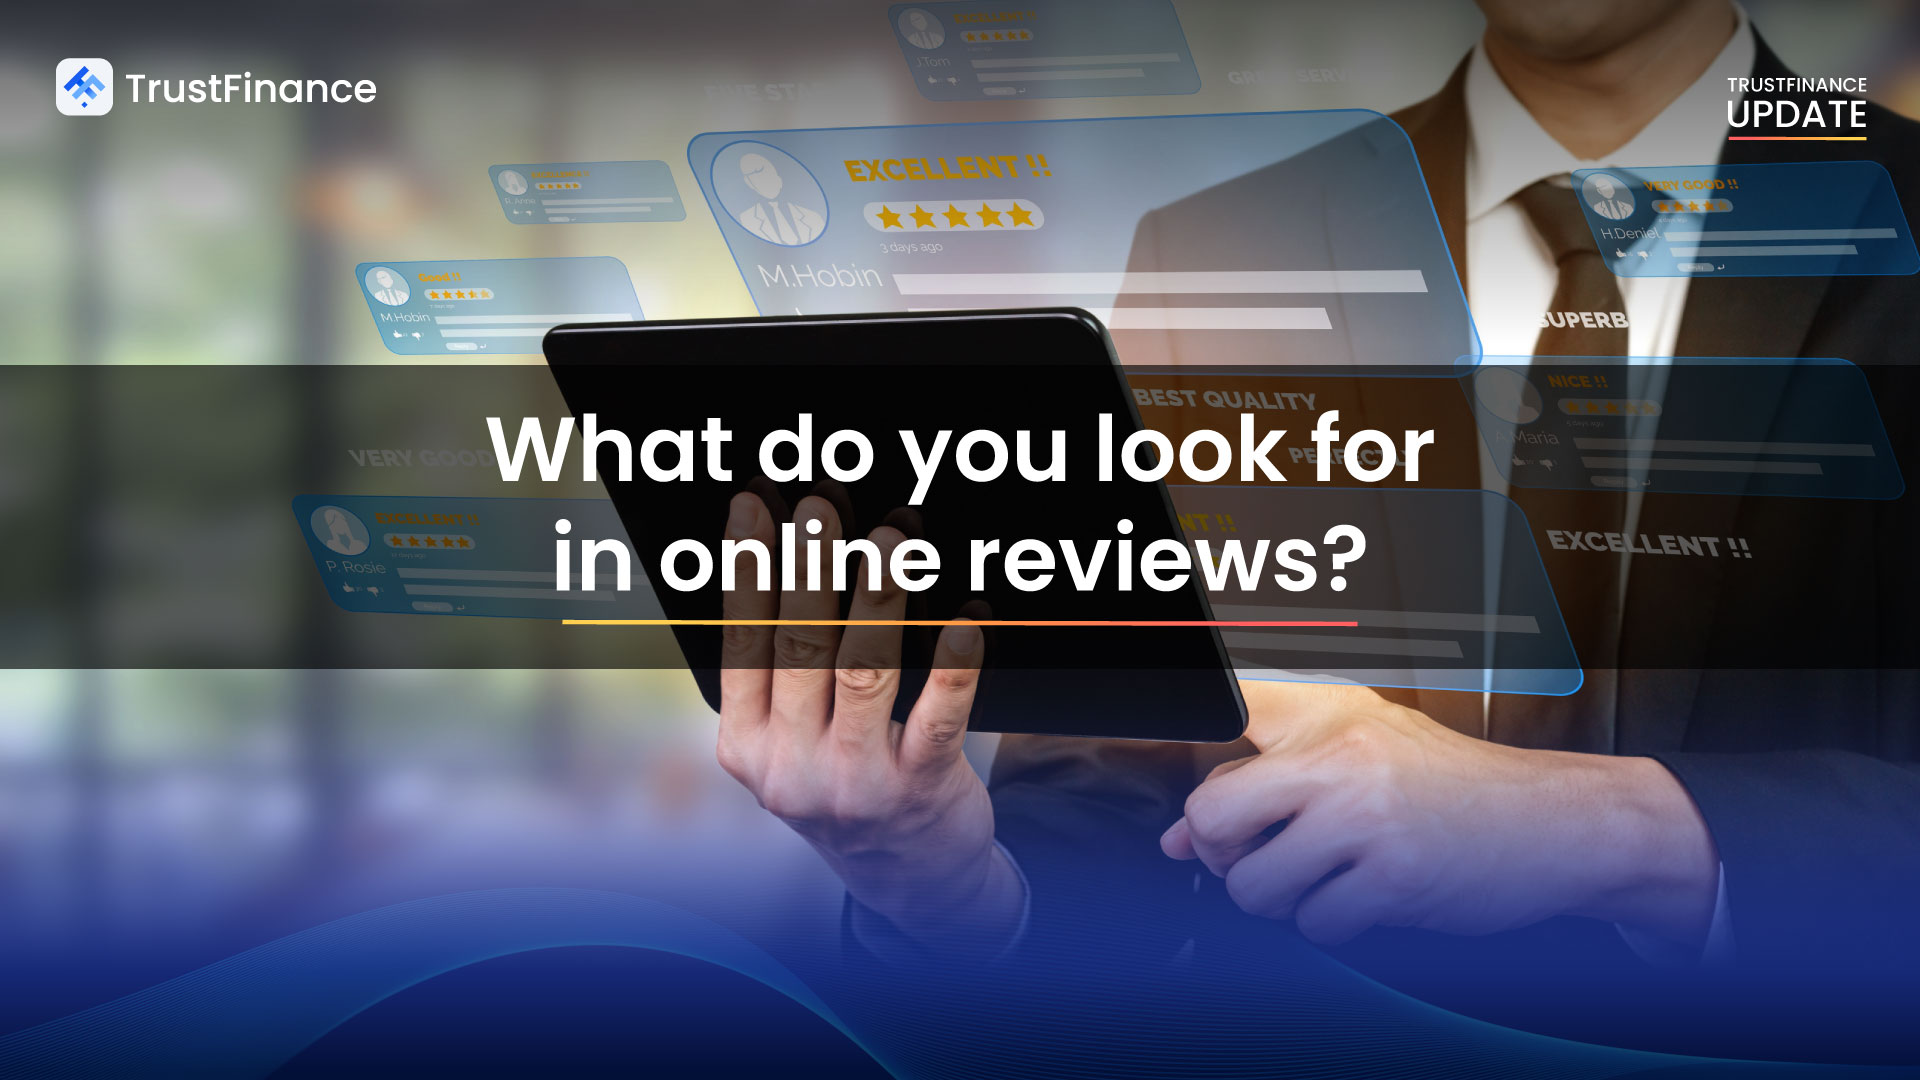 What do you look for in online reviews?